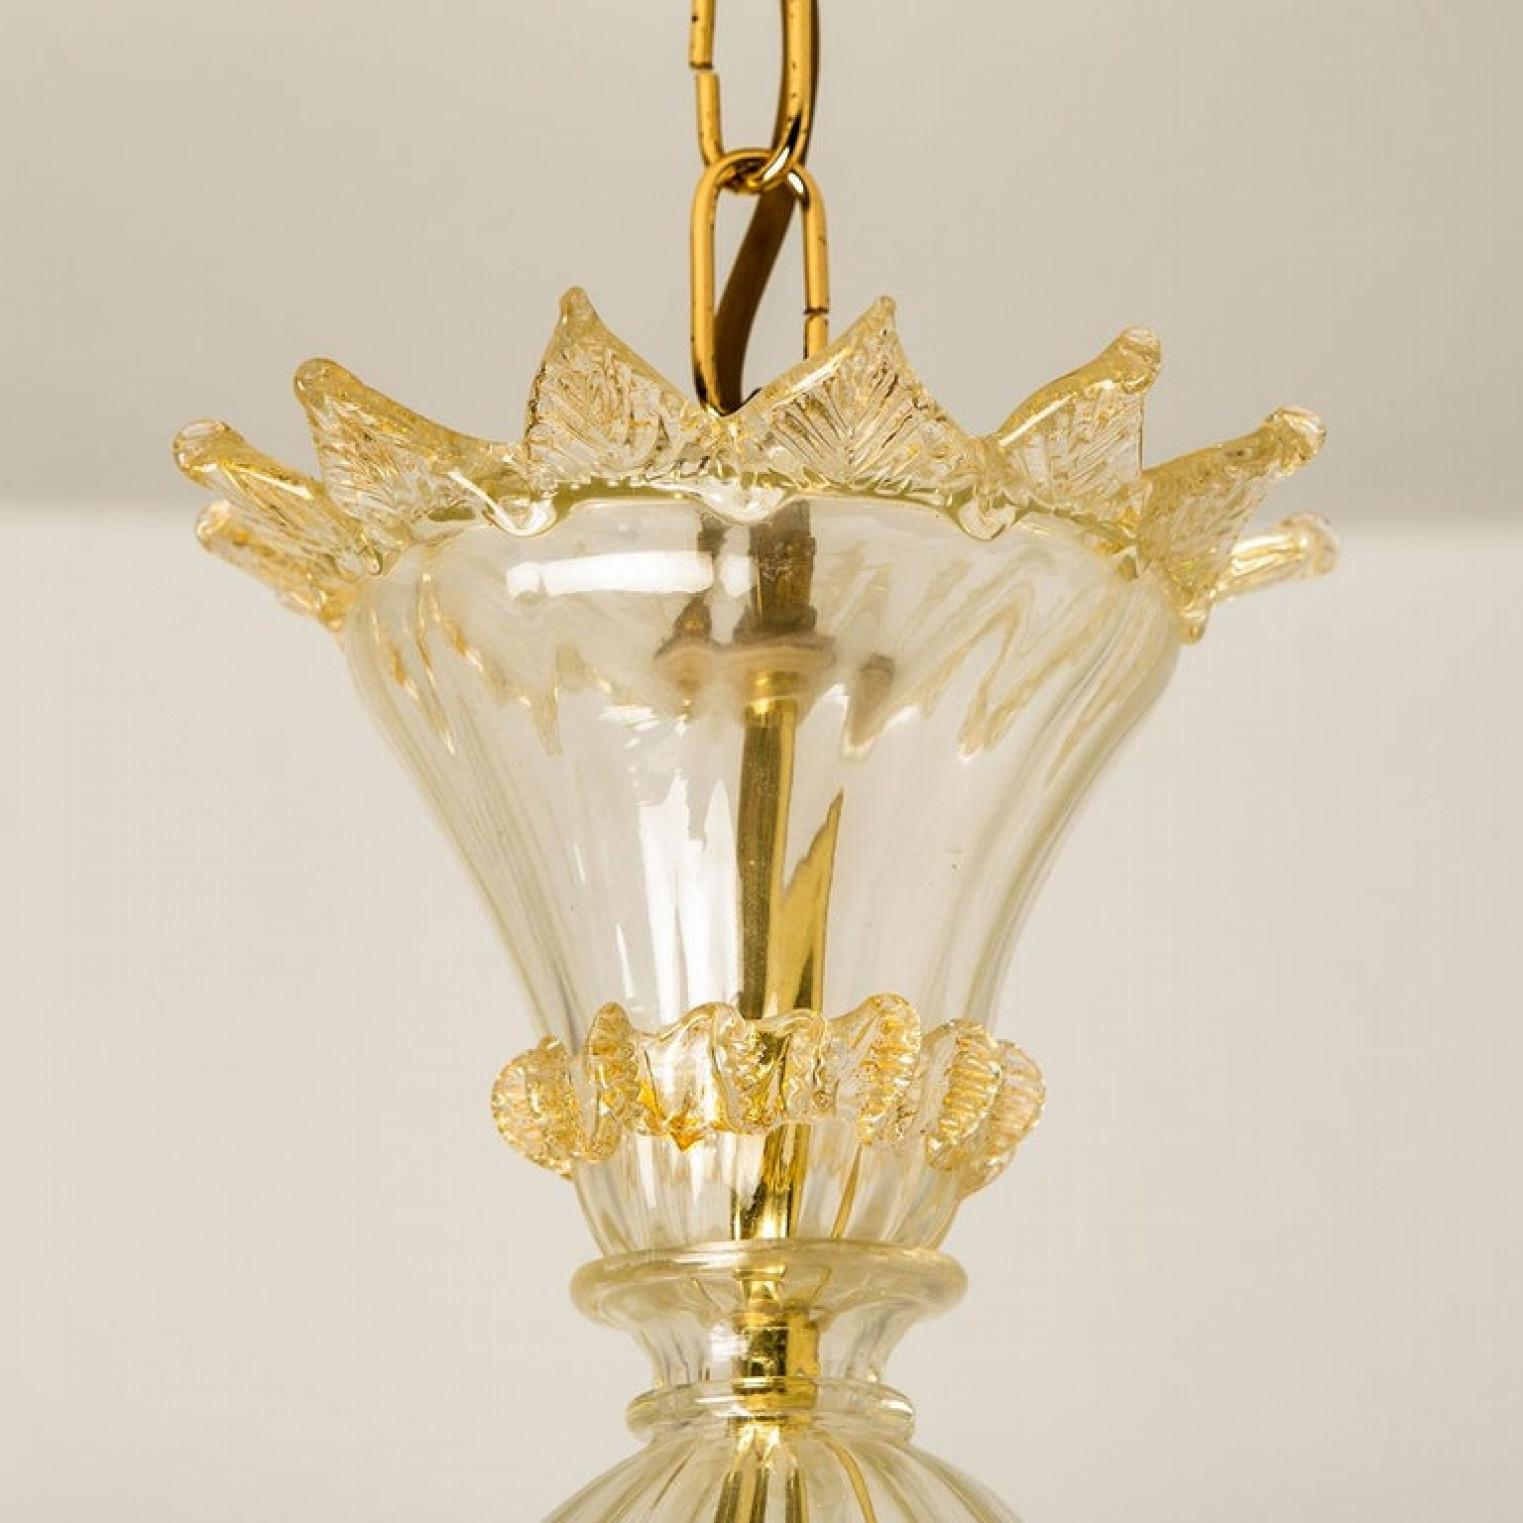 Large Venetian Chandelier in Gilded Murano Glass, by Barovier, 1950s For Sale 3